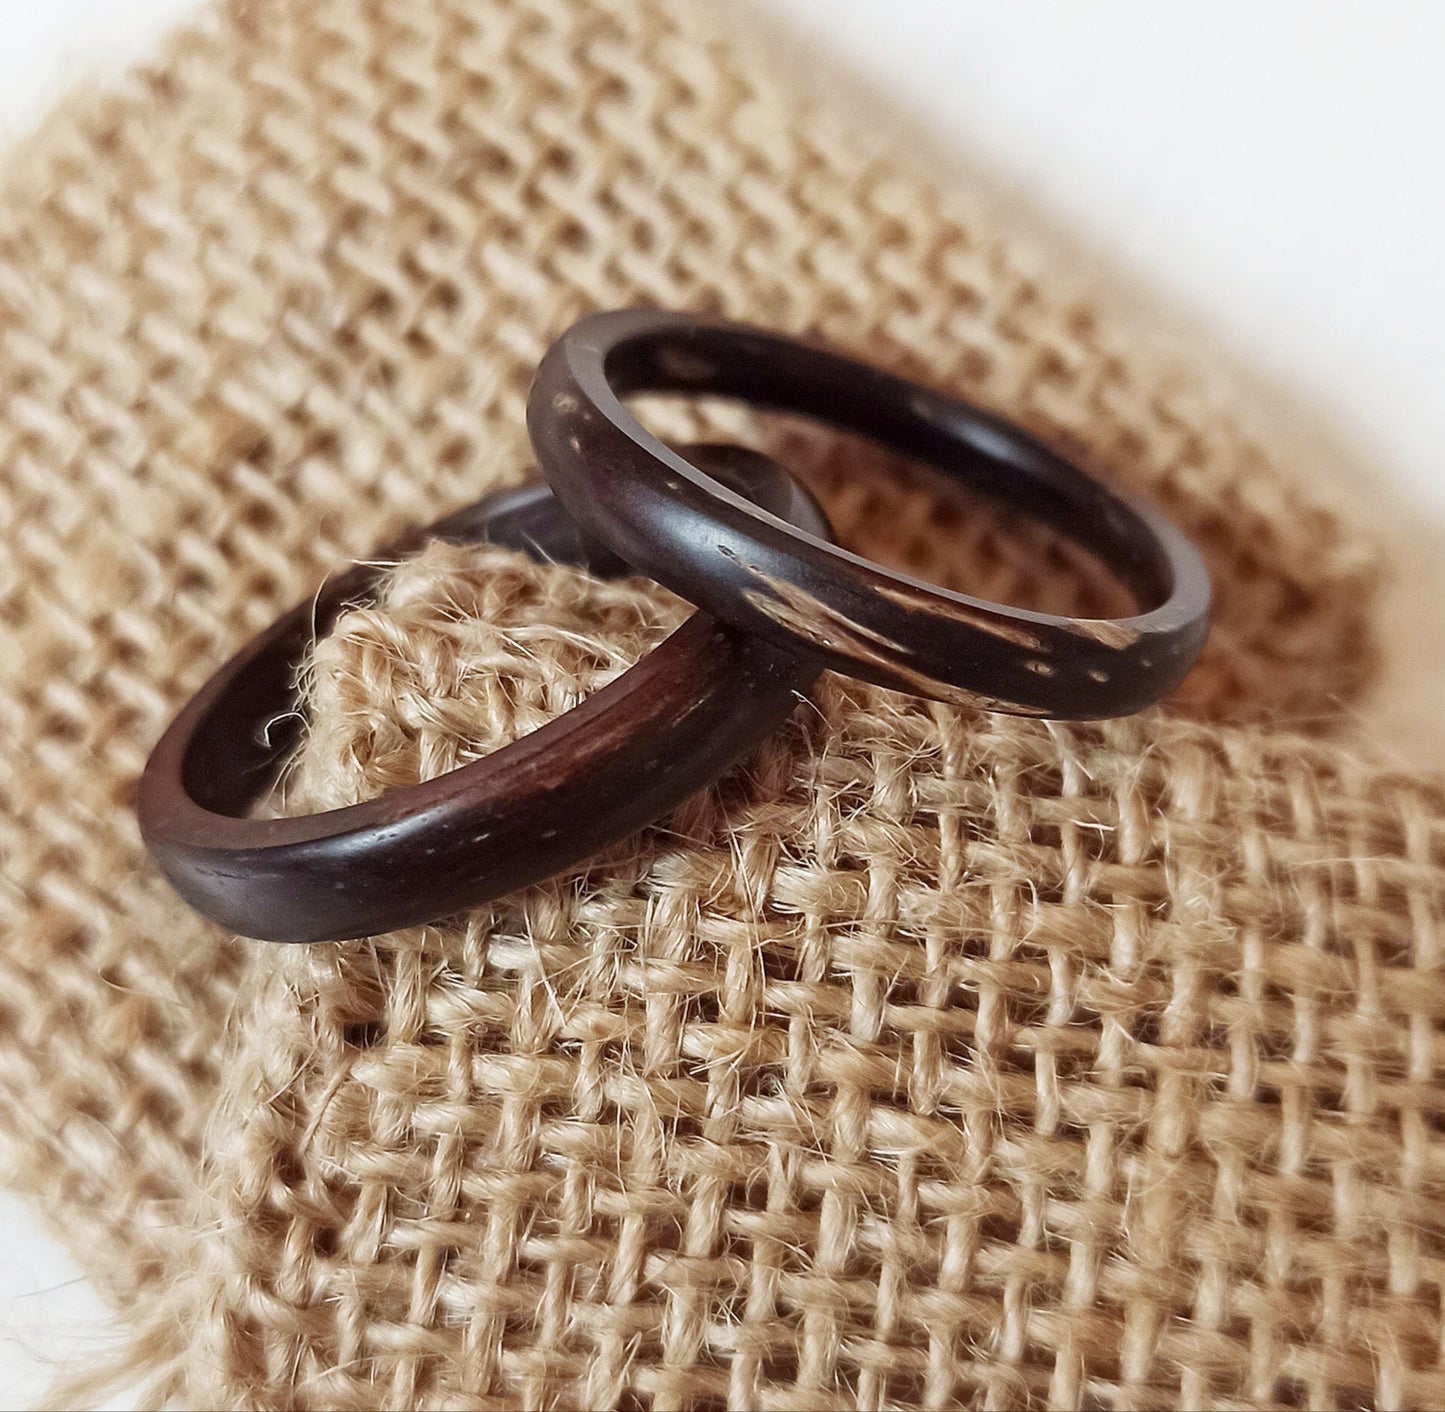 Coconut Shell Band rings, Unisex Rings, Wooden Rings for any occasion, Wedding rings, anniversary rings